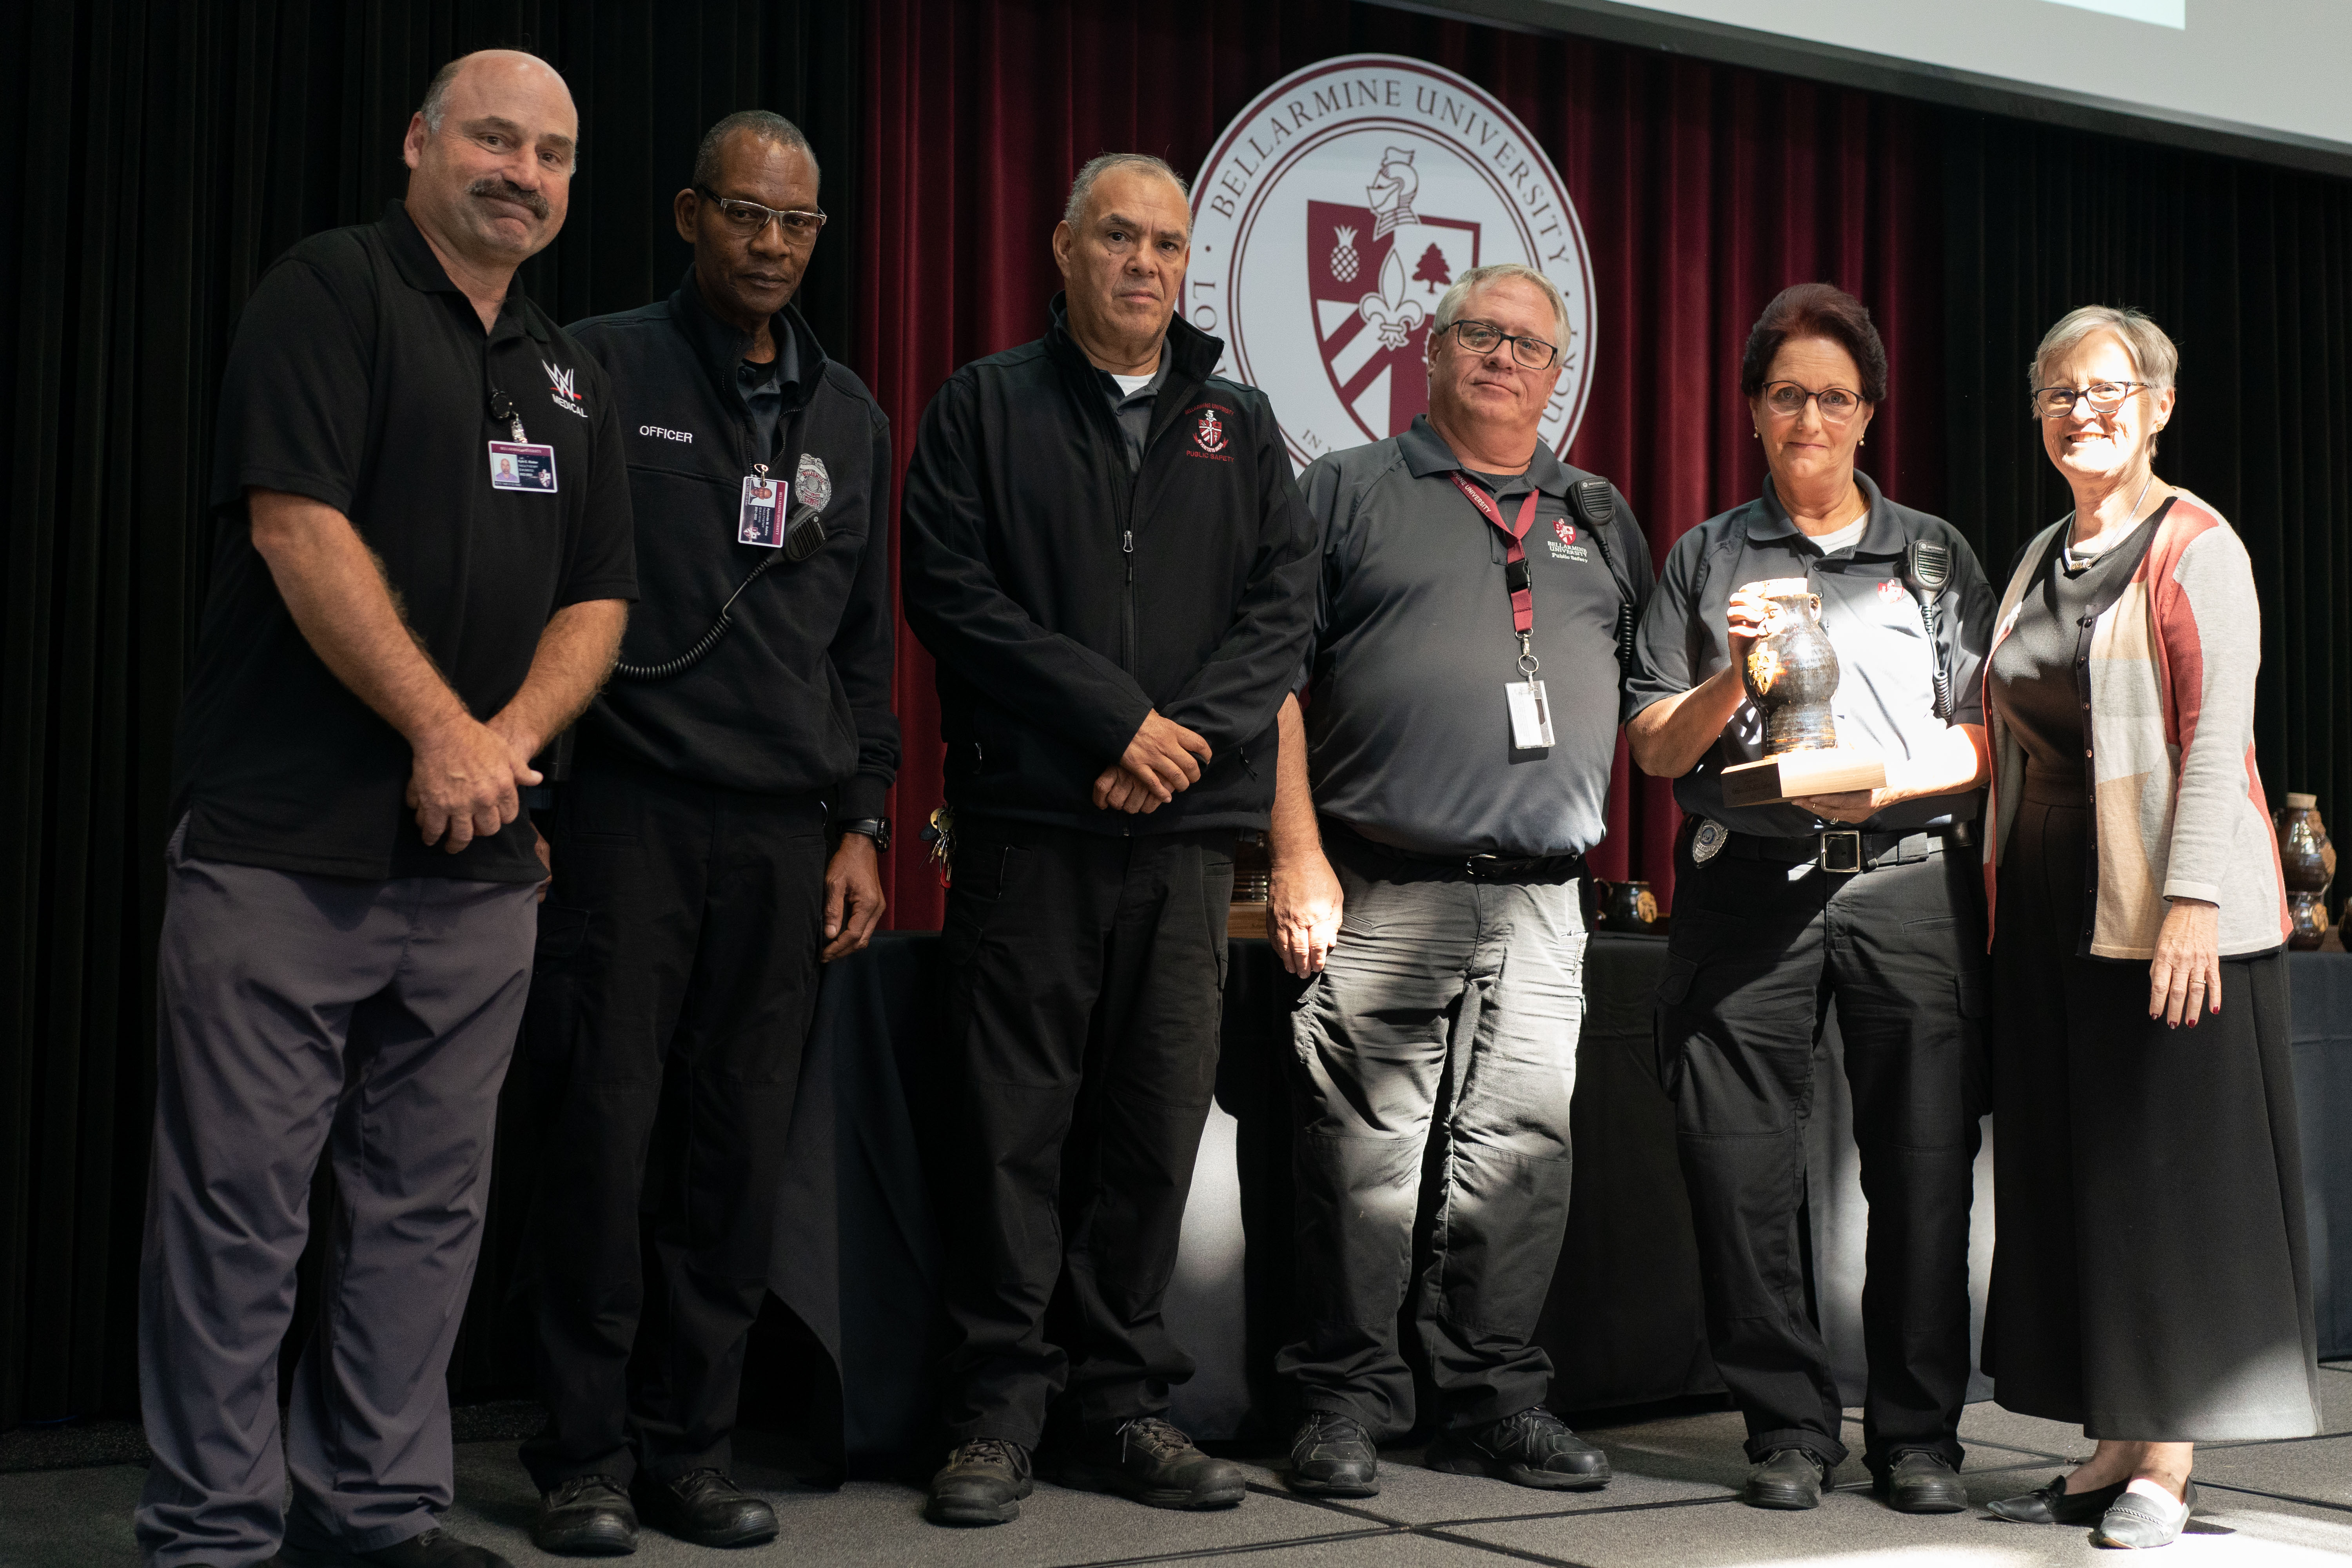 Office of Public Safety receive Homines Pro Aliis For Service to Others award.